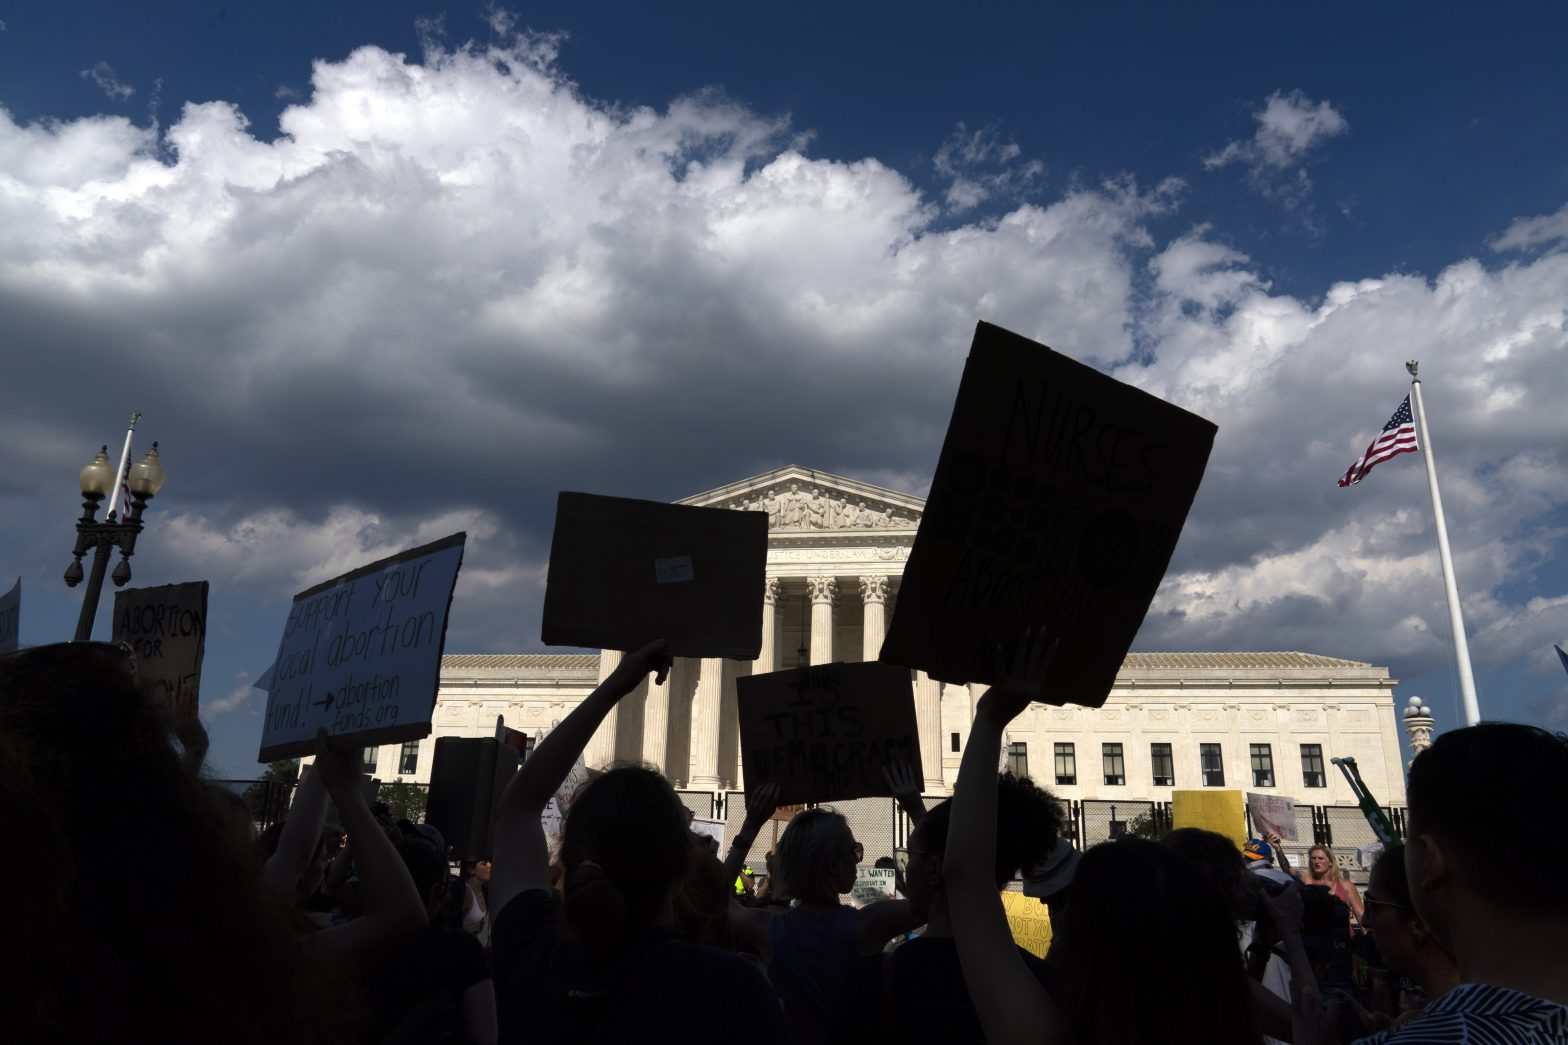 AP-NORC Poll: Few US Adults Support Full Abortion Bans, Even in States That Have Them